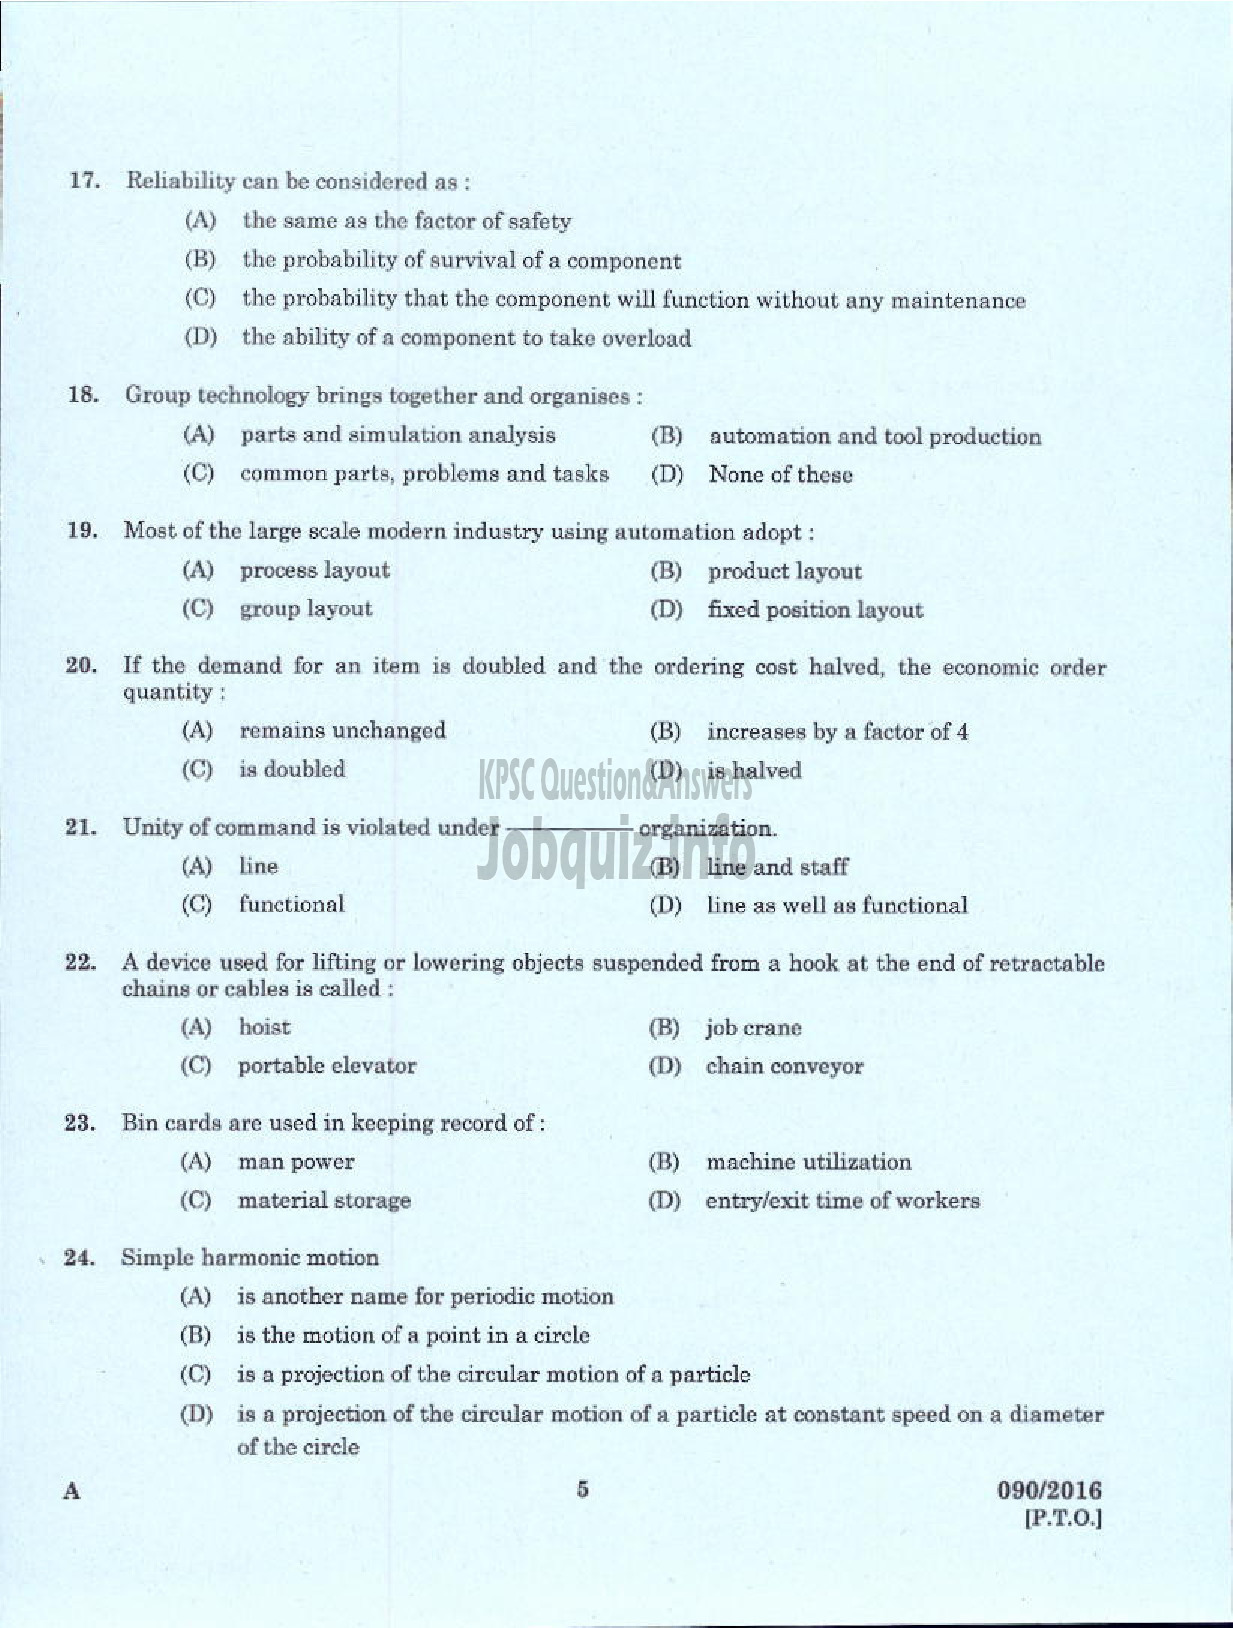 Kerala PSC Question Paper - VOCATIONAL INSTRUCTOR IN REFRIGERATION AND AIR CONDITIONING VHSE-3